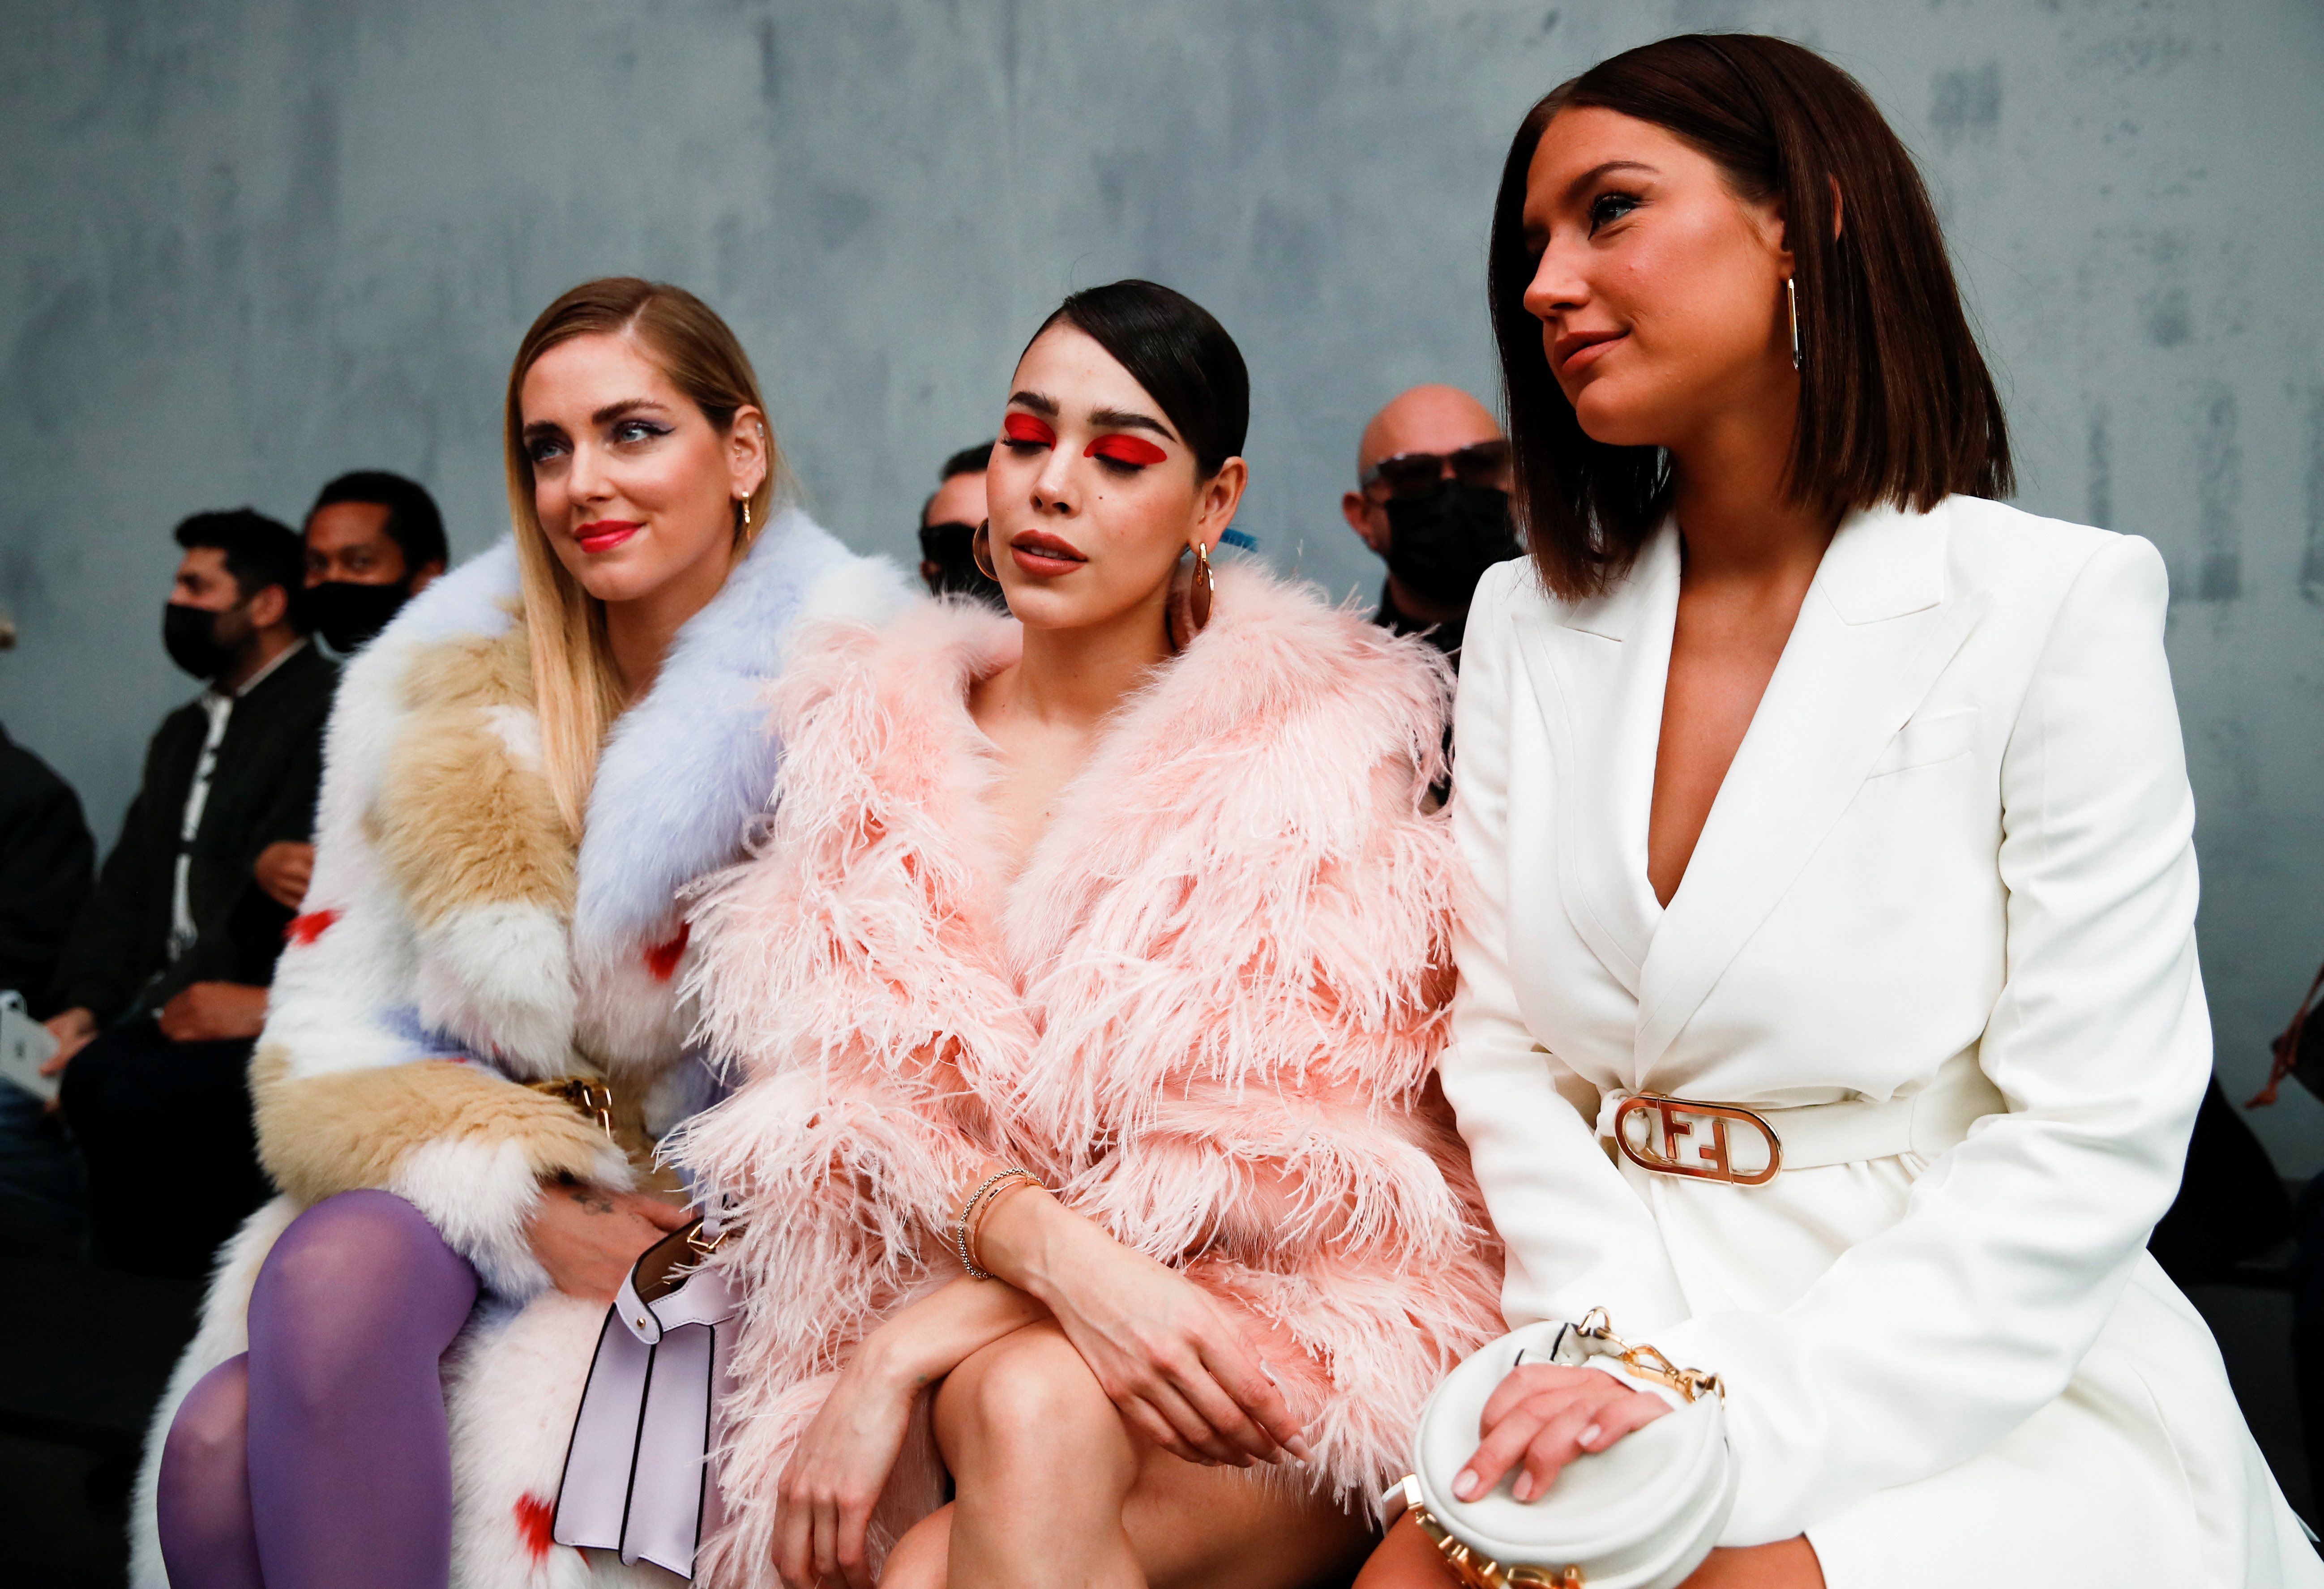 Italian blogger Chiara Ferragni, Mexican singer Danna Paola and French actor Adele Exarchopoulos attend the Fendi Fall/Winter 2022/2023 collection show during Fashion Week in Milan, Italy, February 23, 2022. REUTERS/Alessandro Garofalo